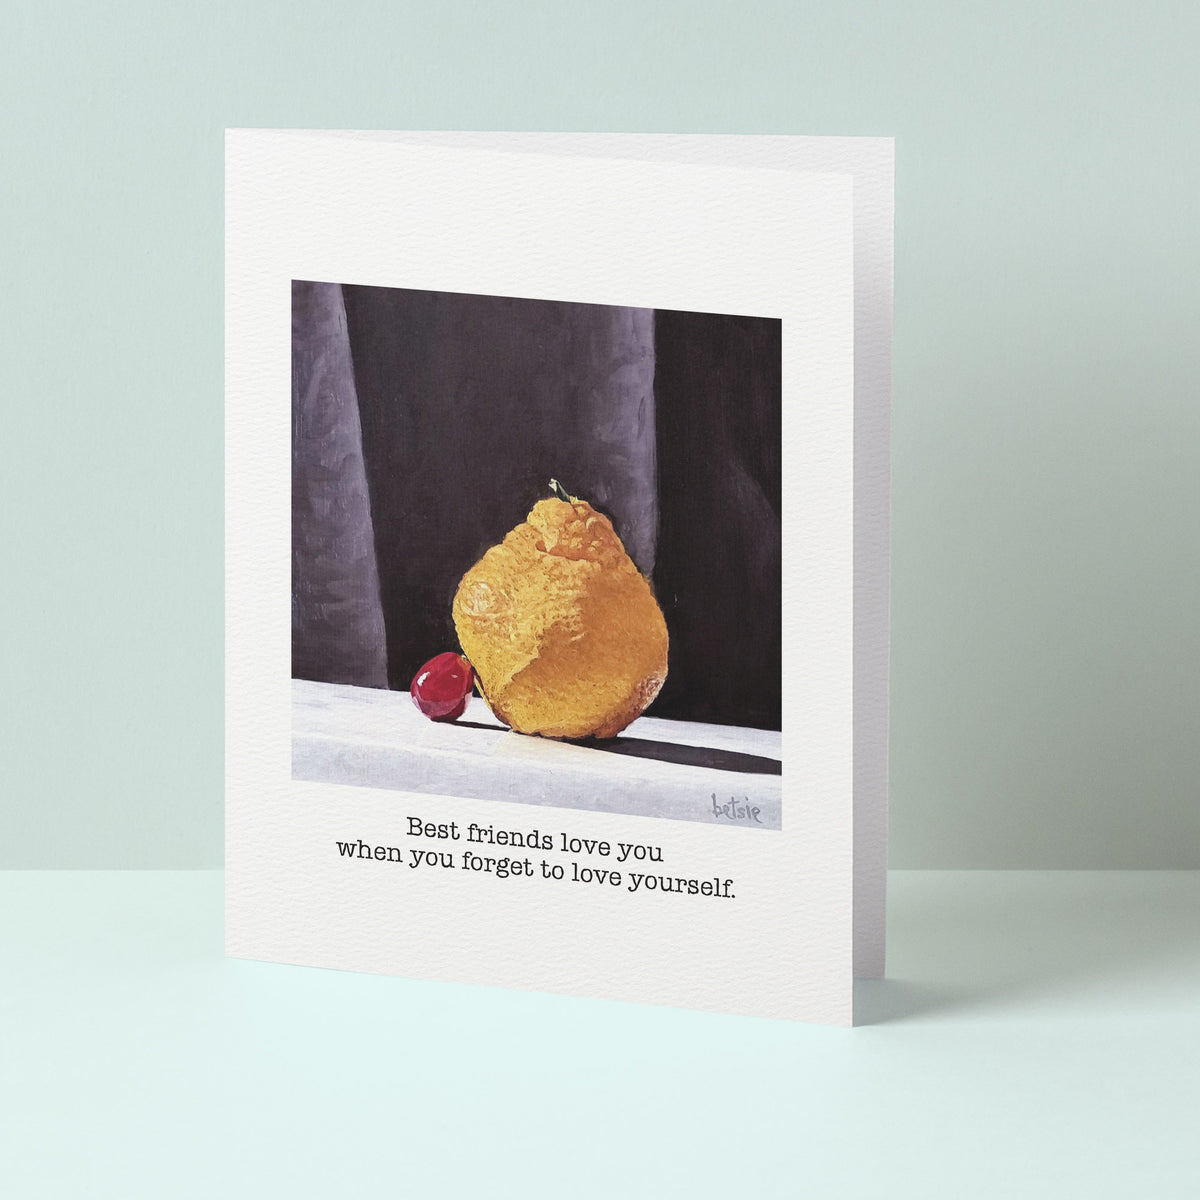 "Best friends love you when you forget" Greeting Card